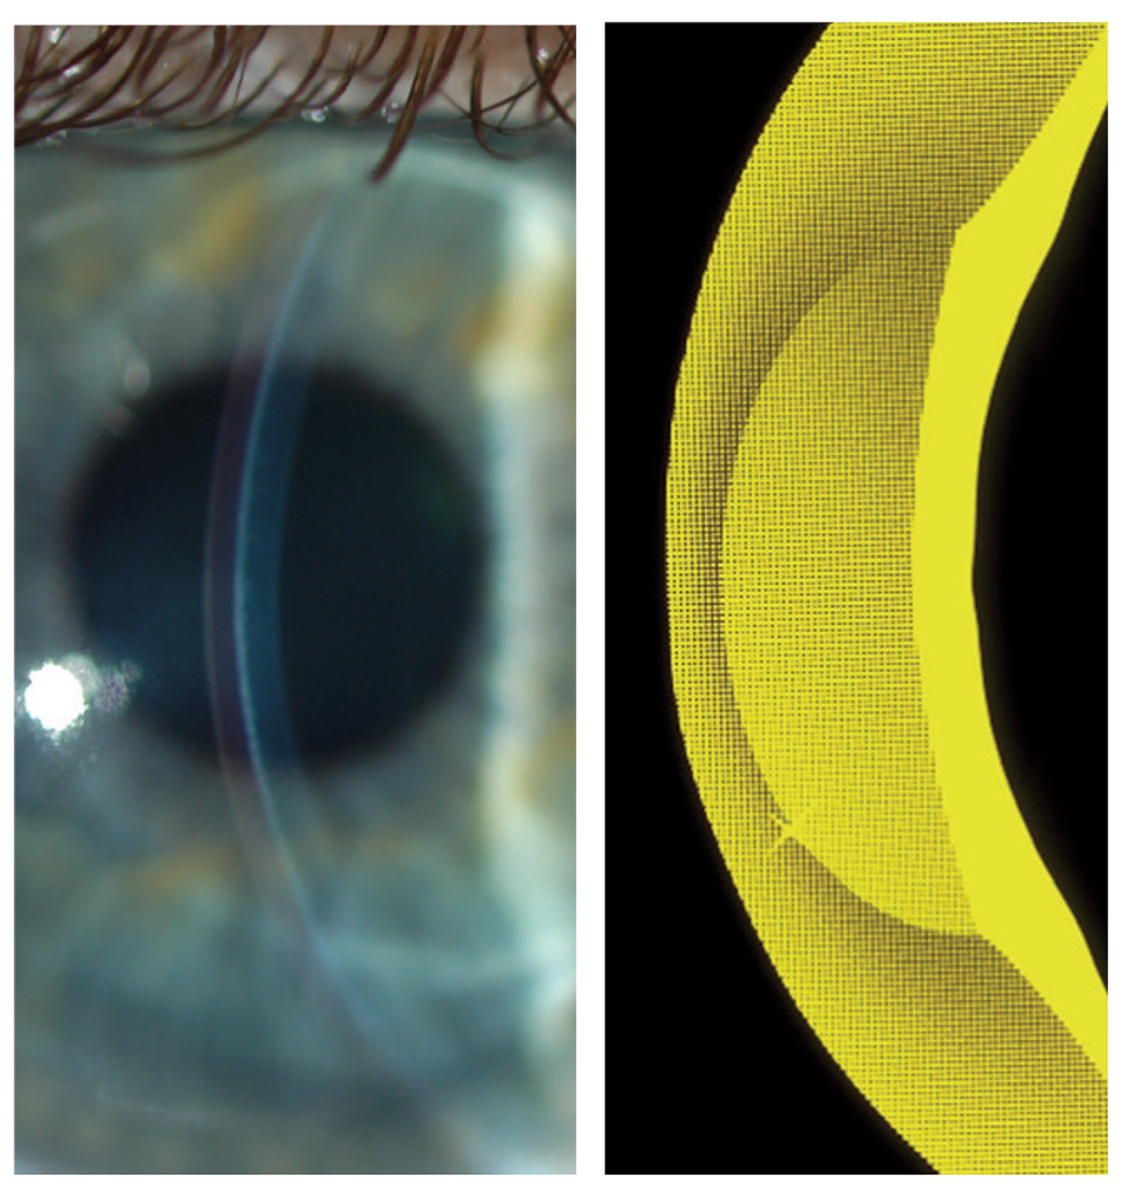 Fig. 8. The maximum irregular astigmatism correcting ability is reached at a center thickness of 0.5mm, which is over the central optic zone and does not extend over the carrier/haptic portion of the lens. 